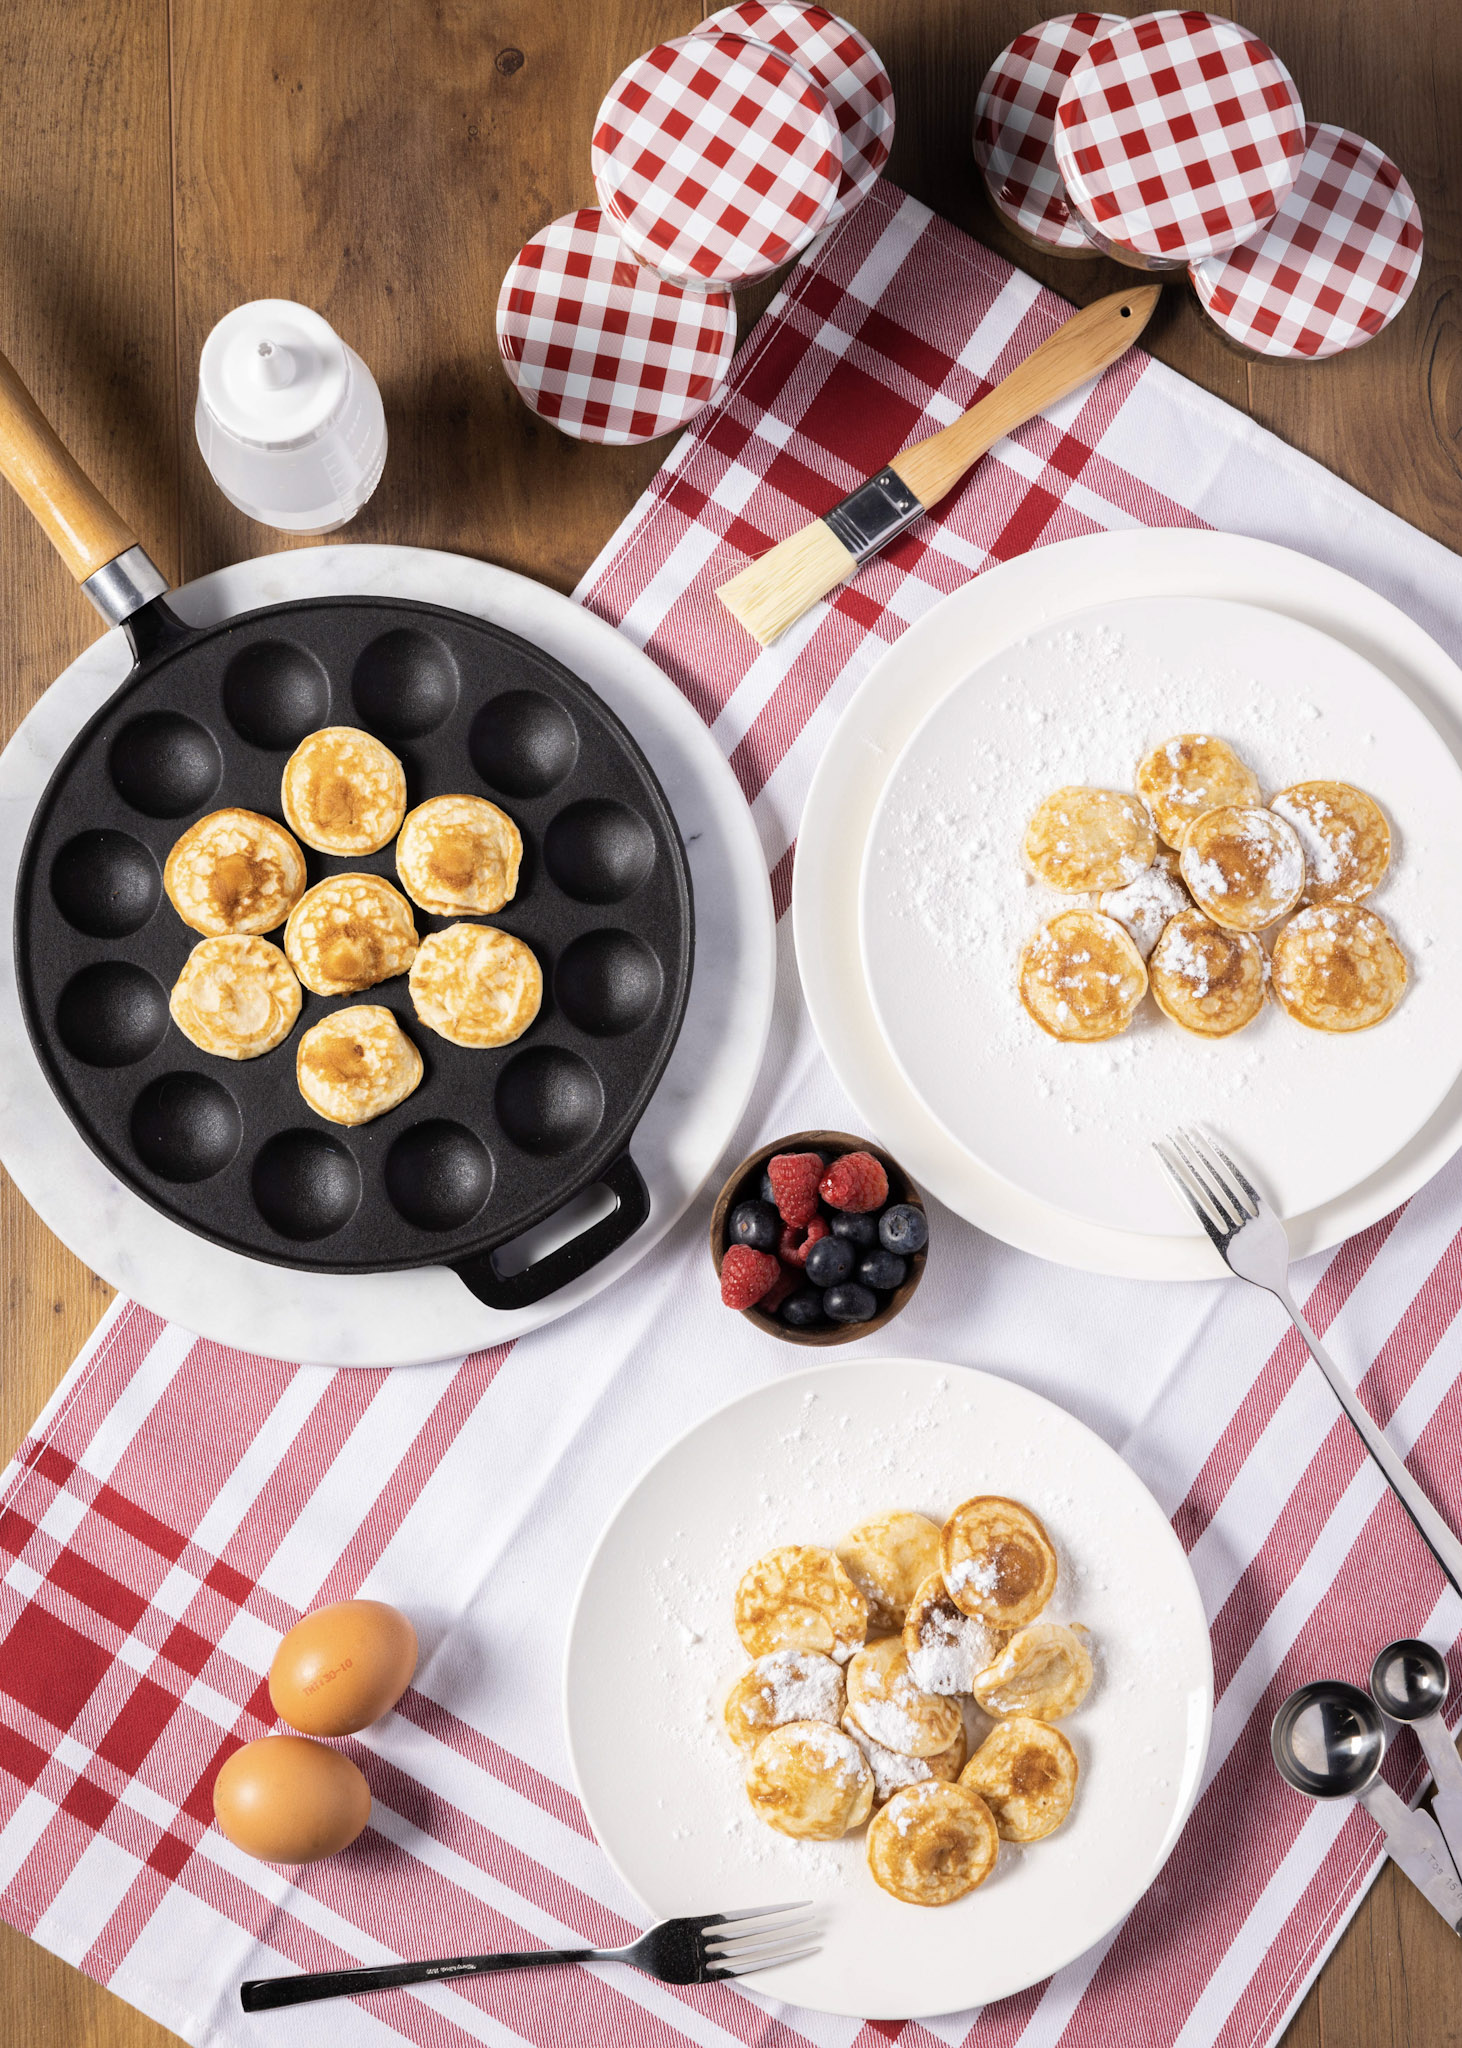 Small Pancakes Pan  Buy now at Cookinglife